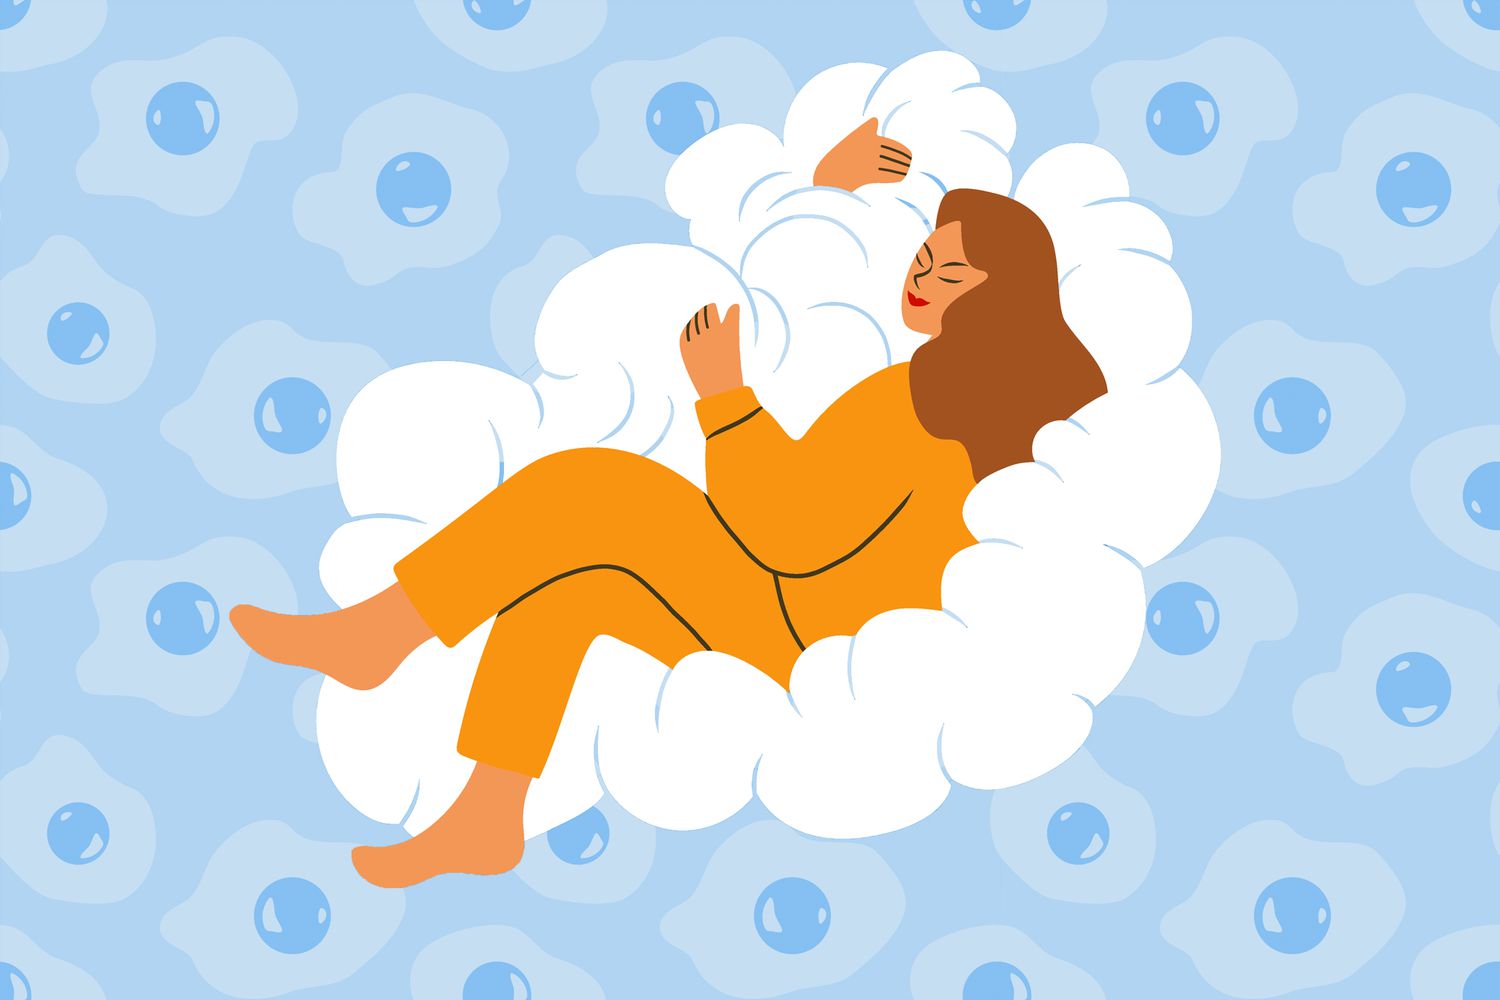 an illustration of a person in pajamas sleeping soundly on a cloud with eggs in the background